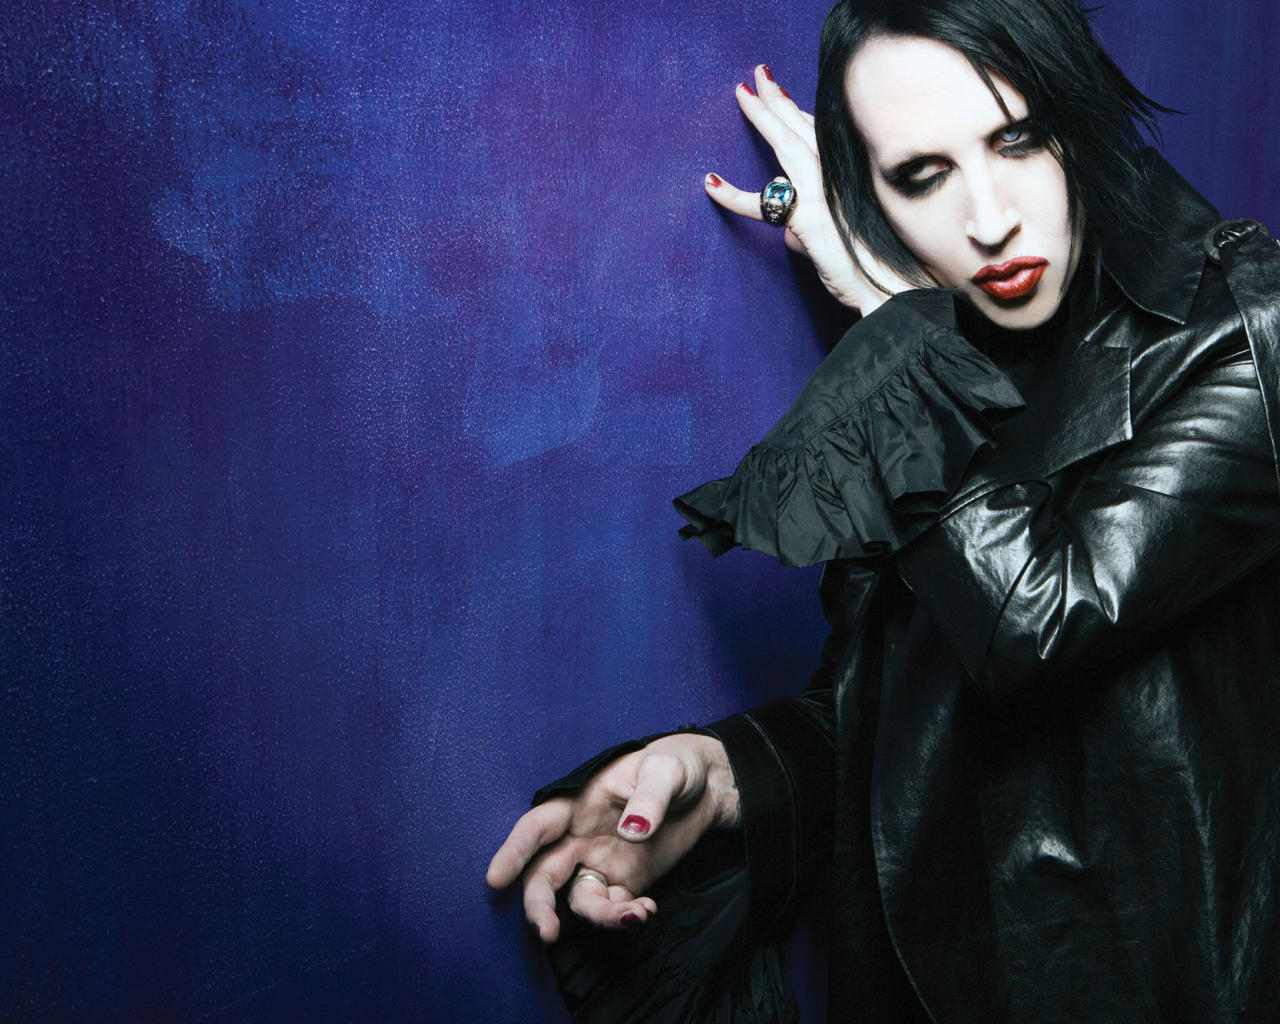 Marilyn Manson at the blue wall